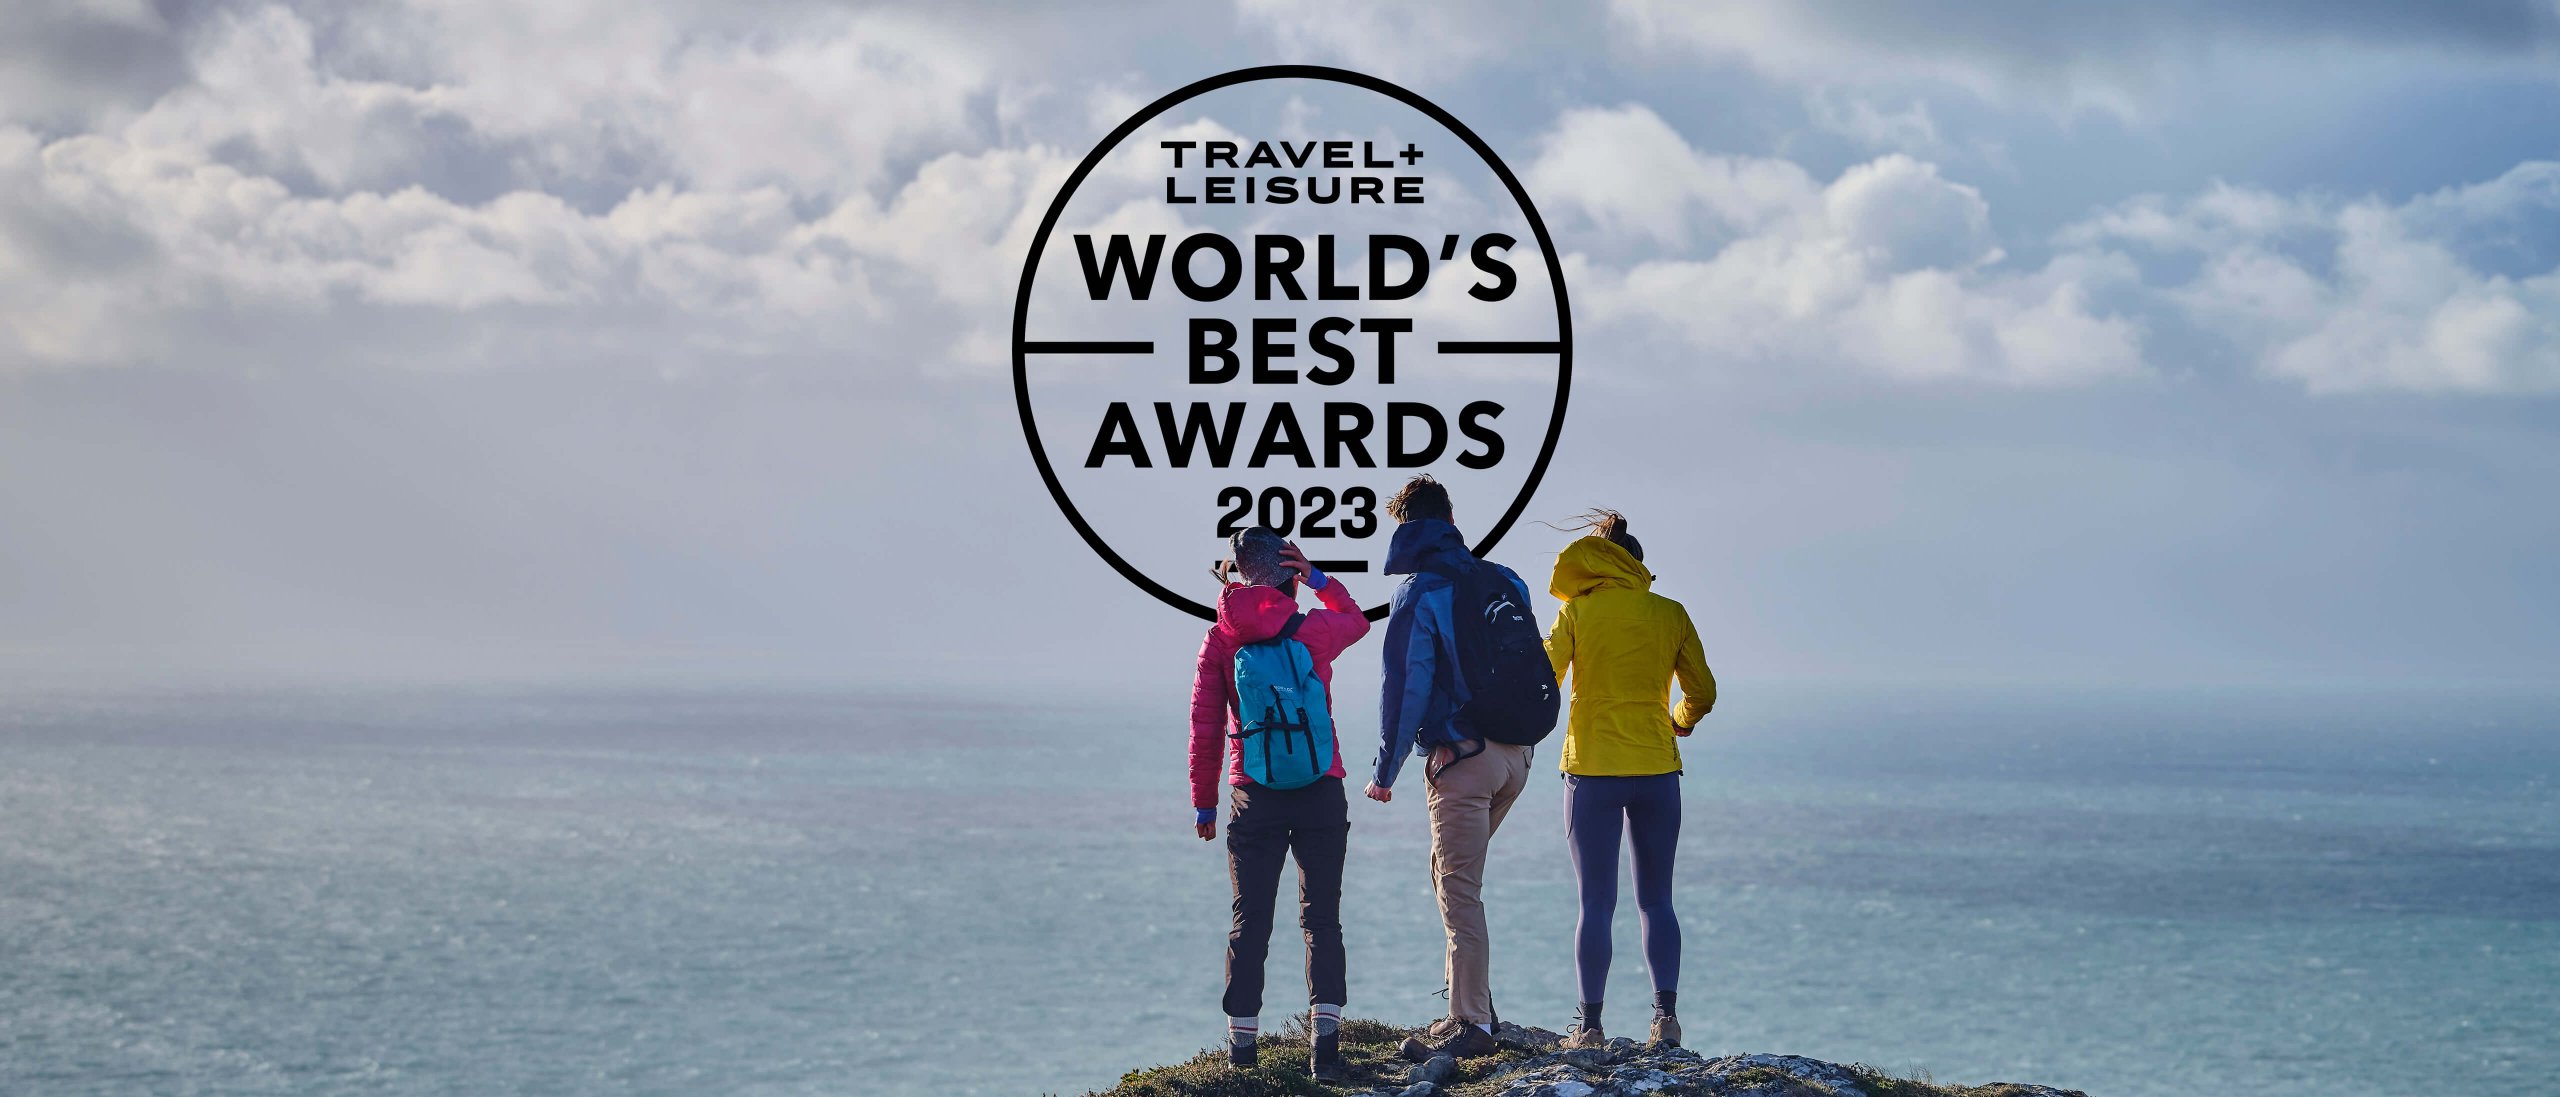 Three hikers with the Travel + Leisure World's Best Awards 2023 badge and a scenic seascape